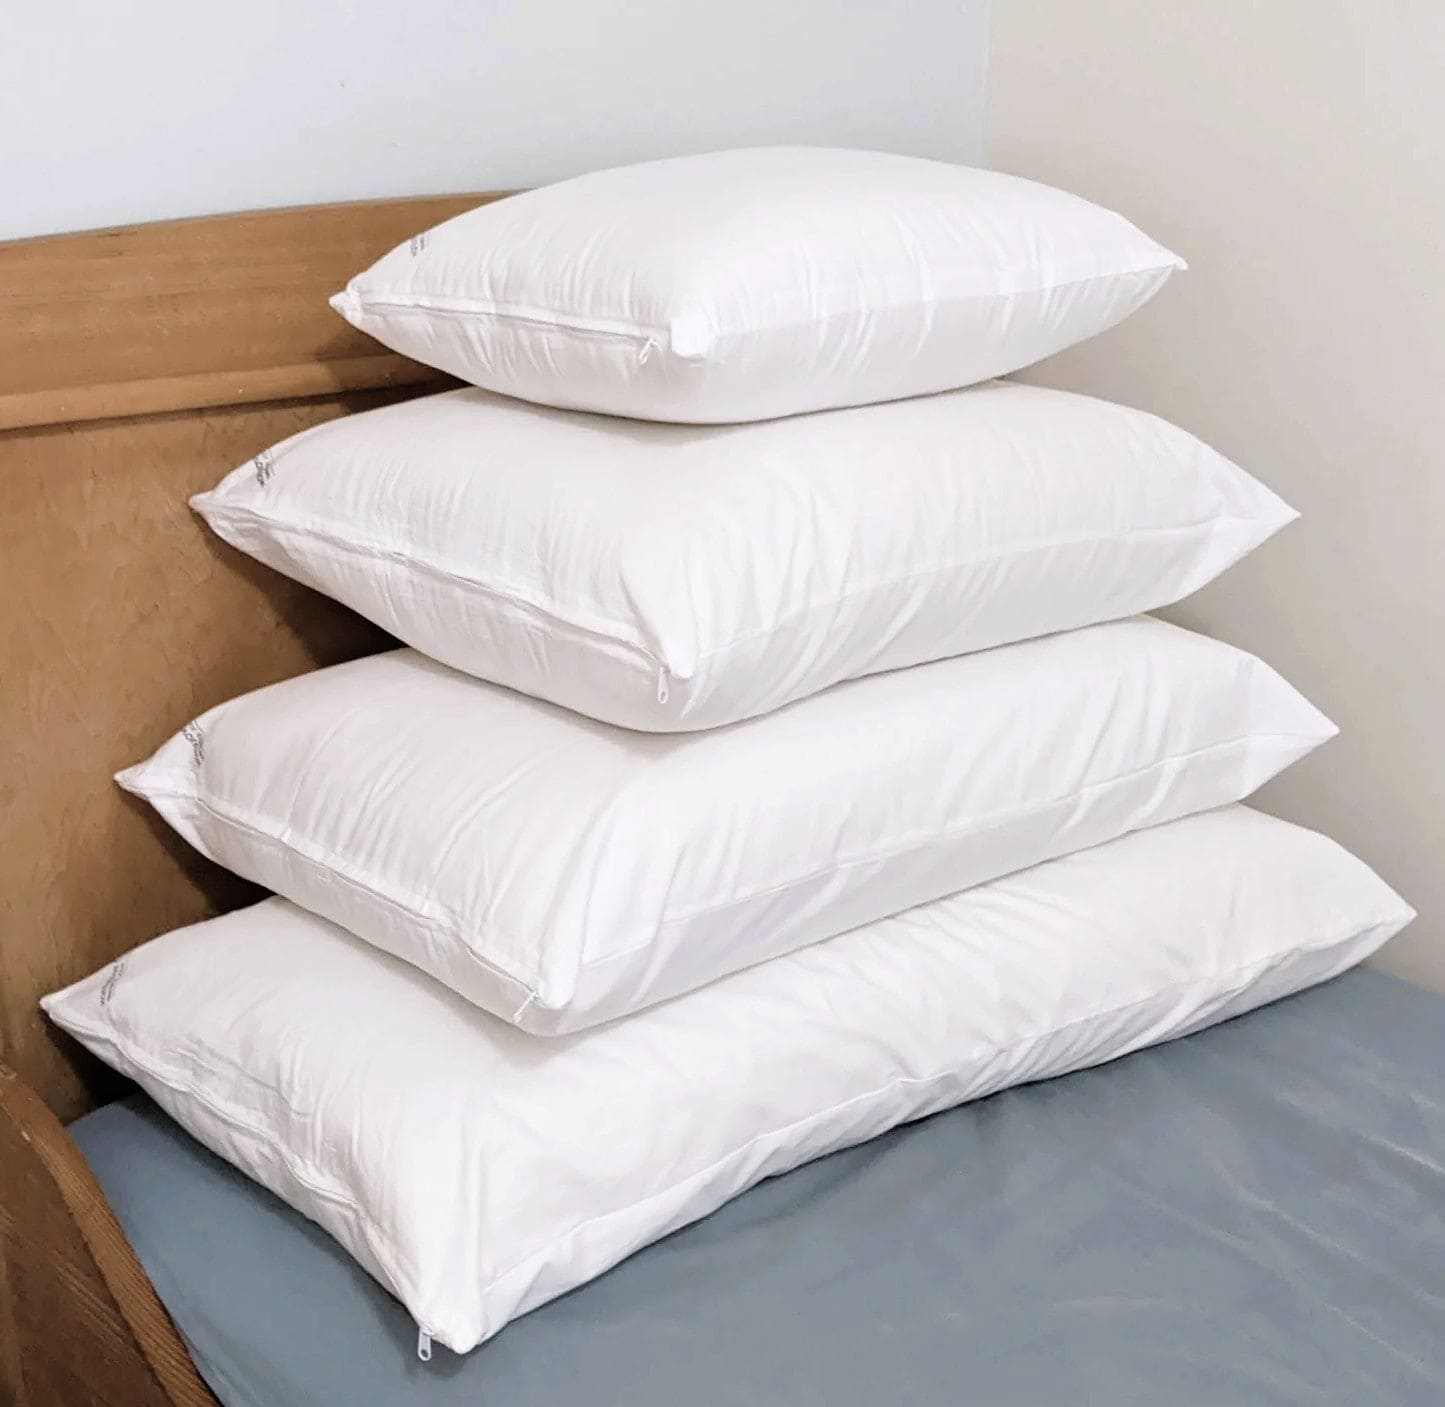 4 sizes of bed pillows made from wool grown and milled in Canada